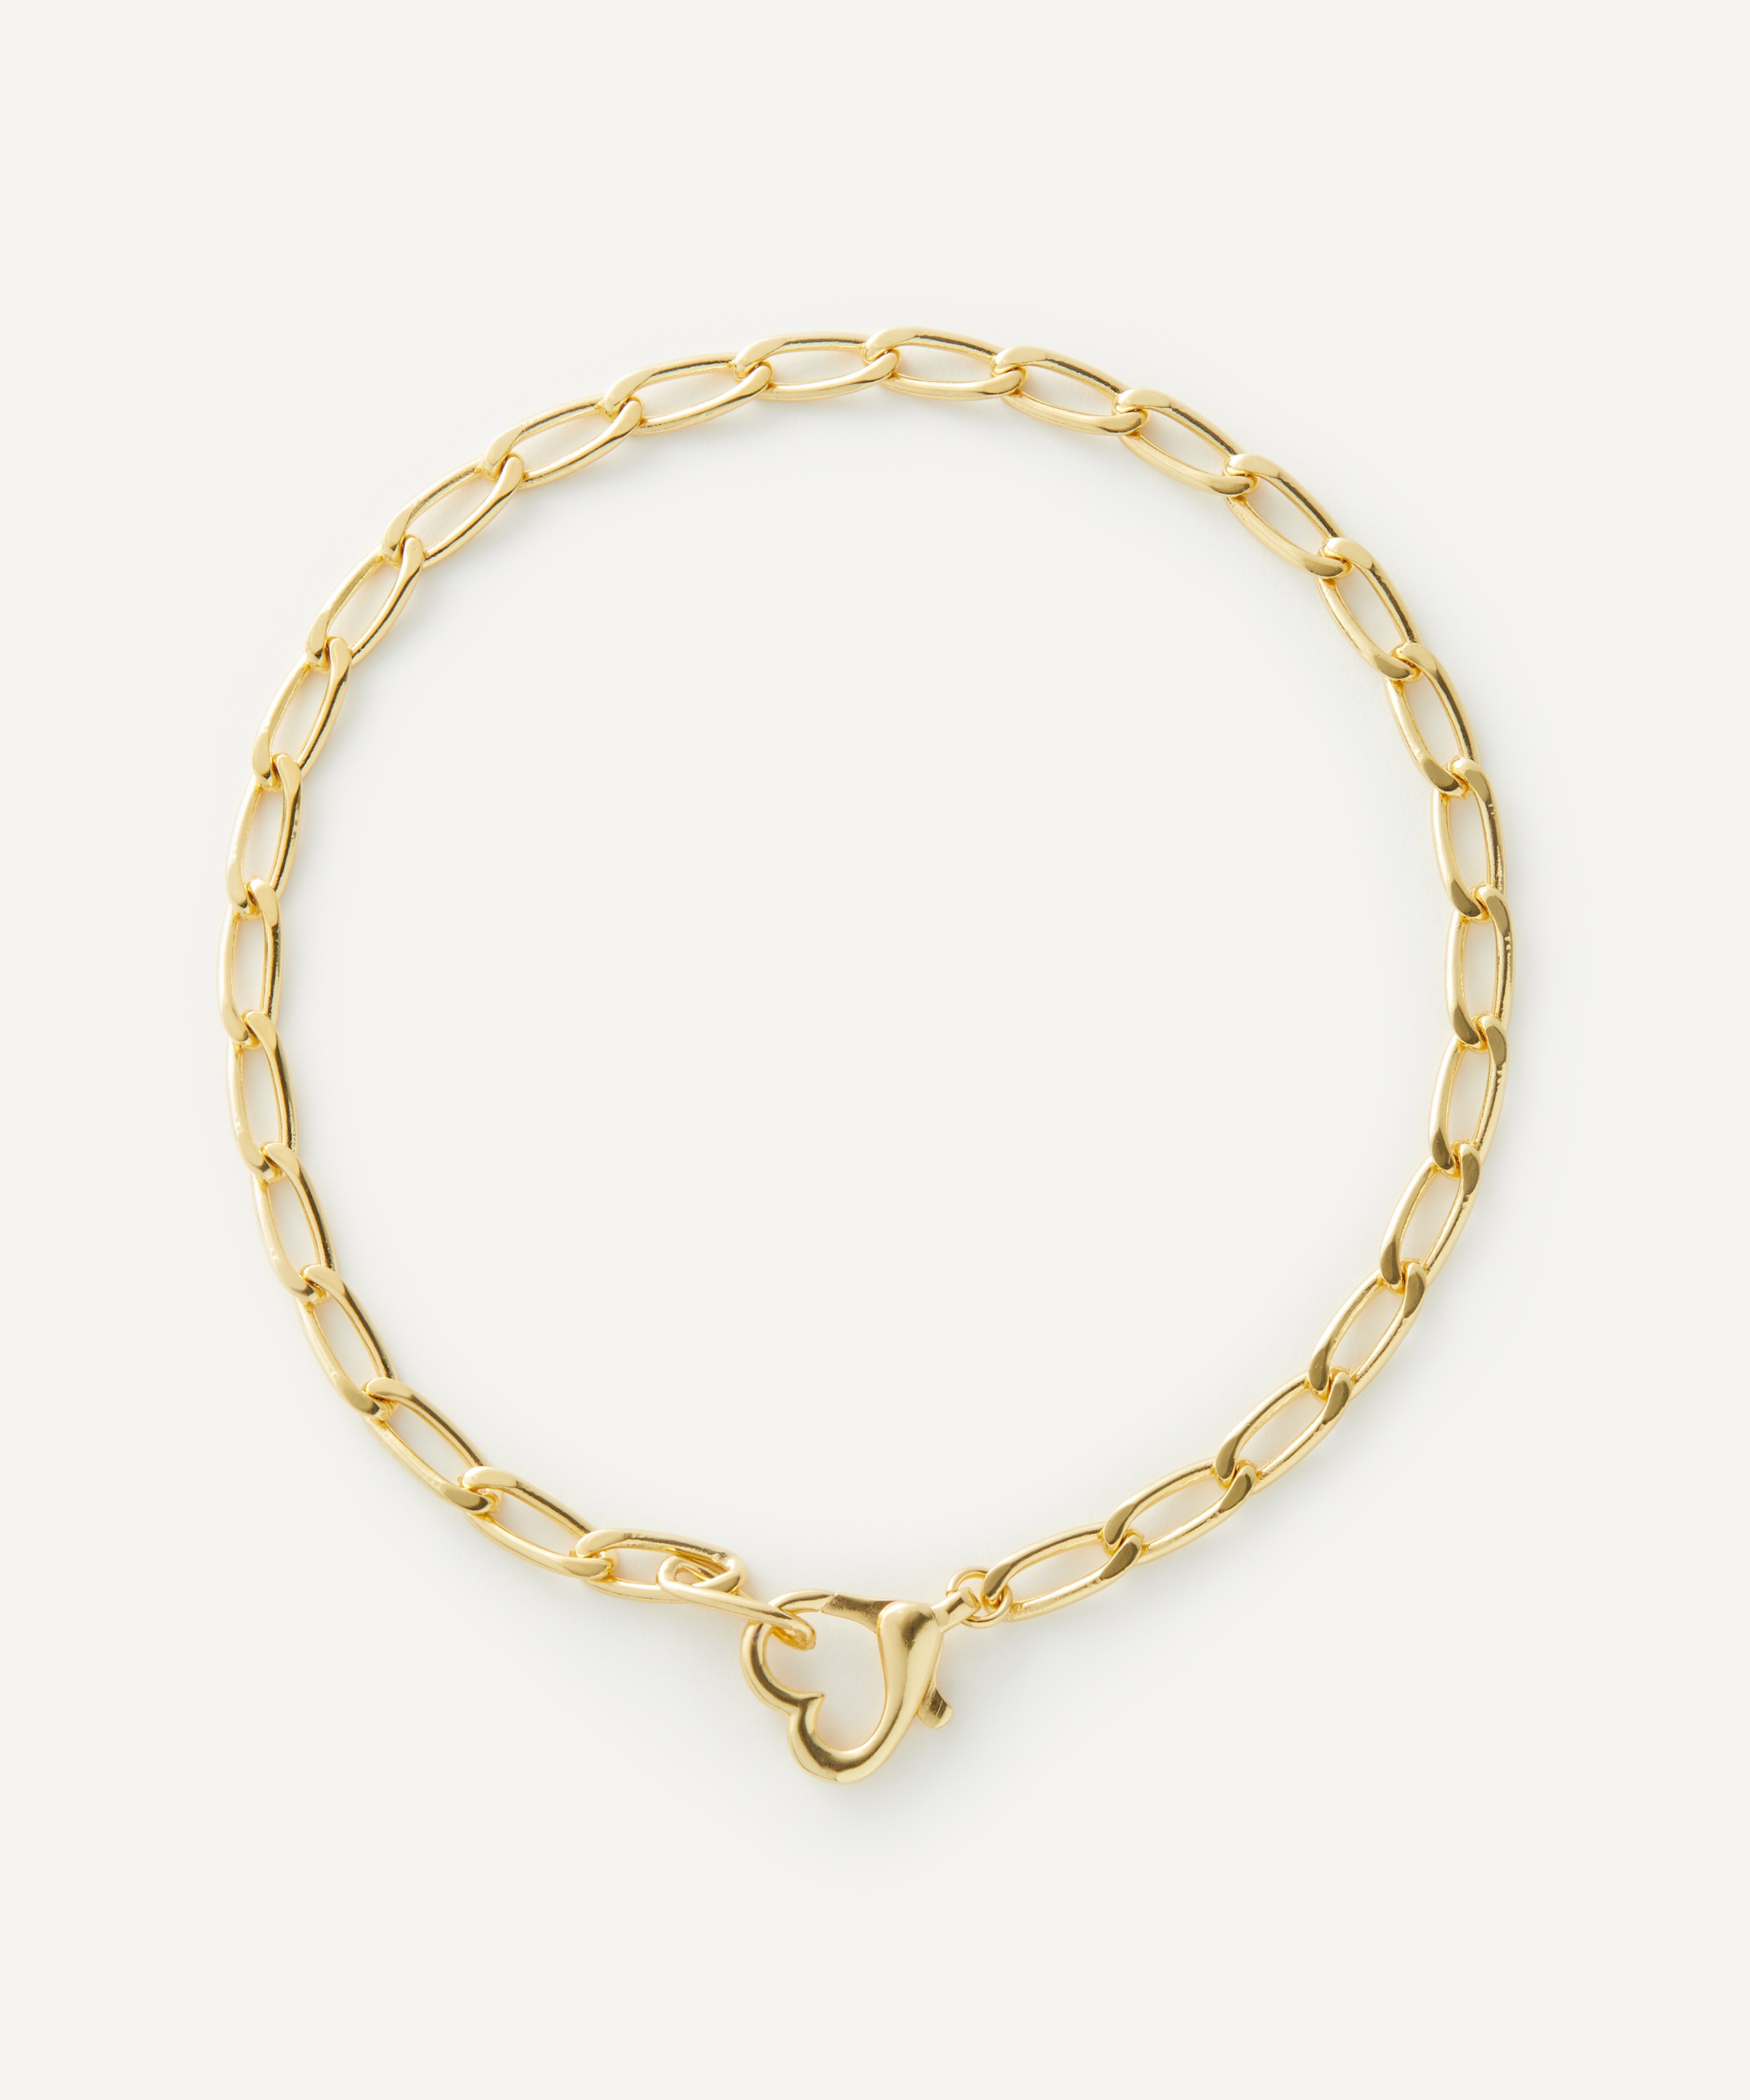 Anna + Nina - Gold-Plated Locked Love Chain Necklace